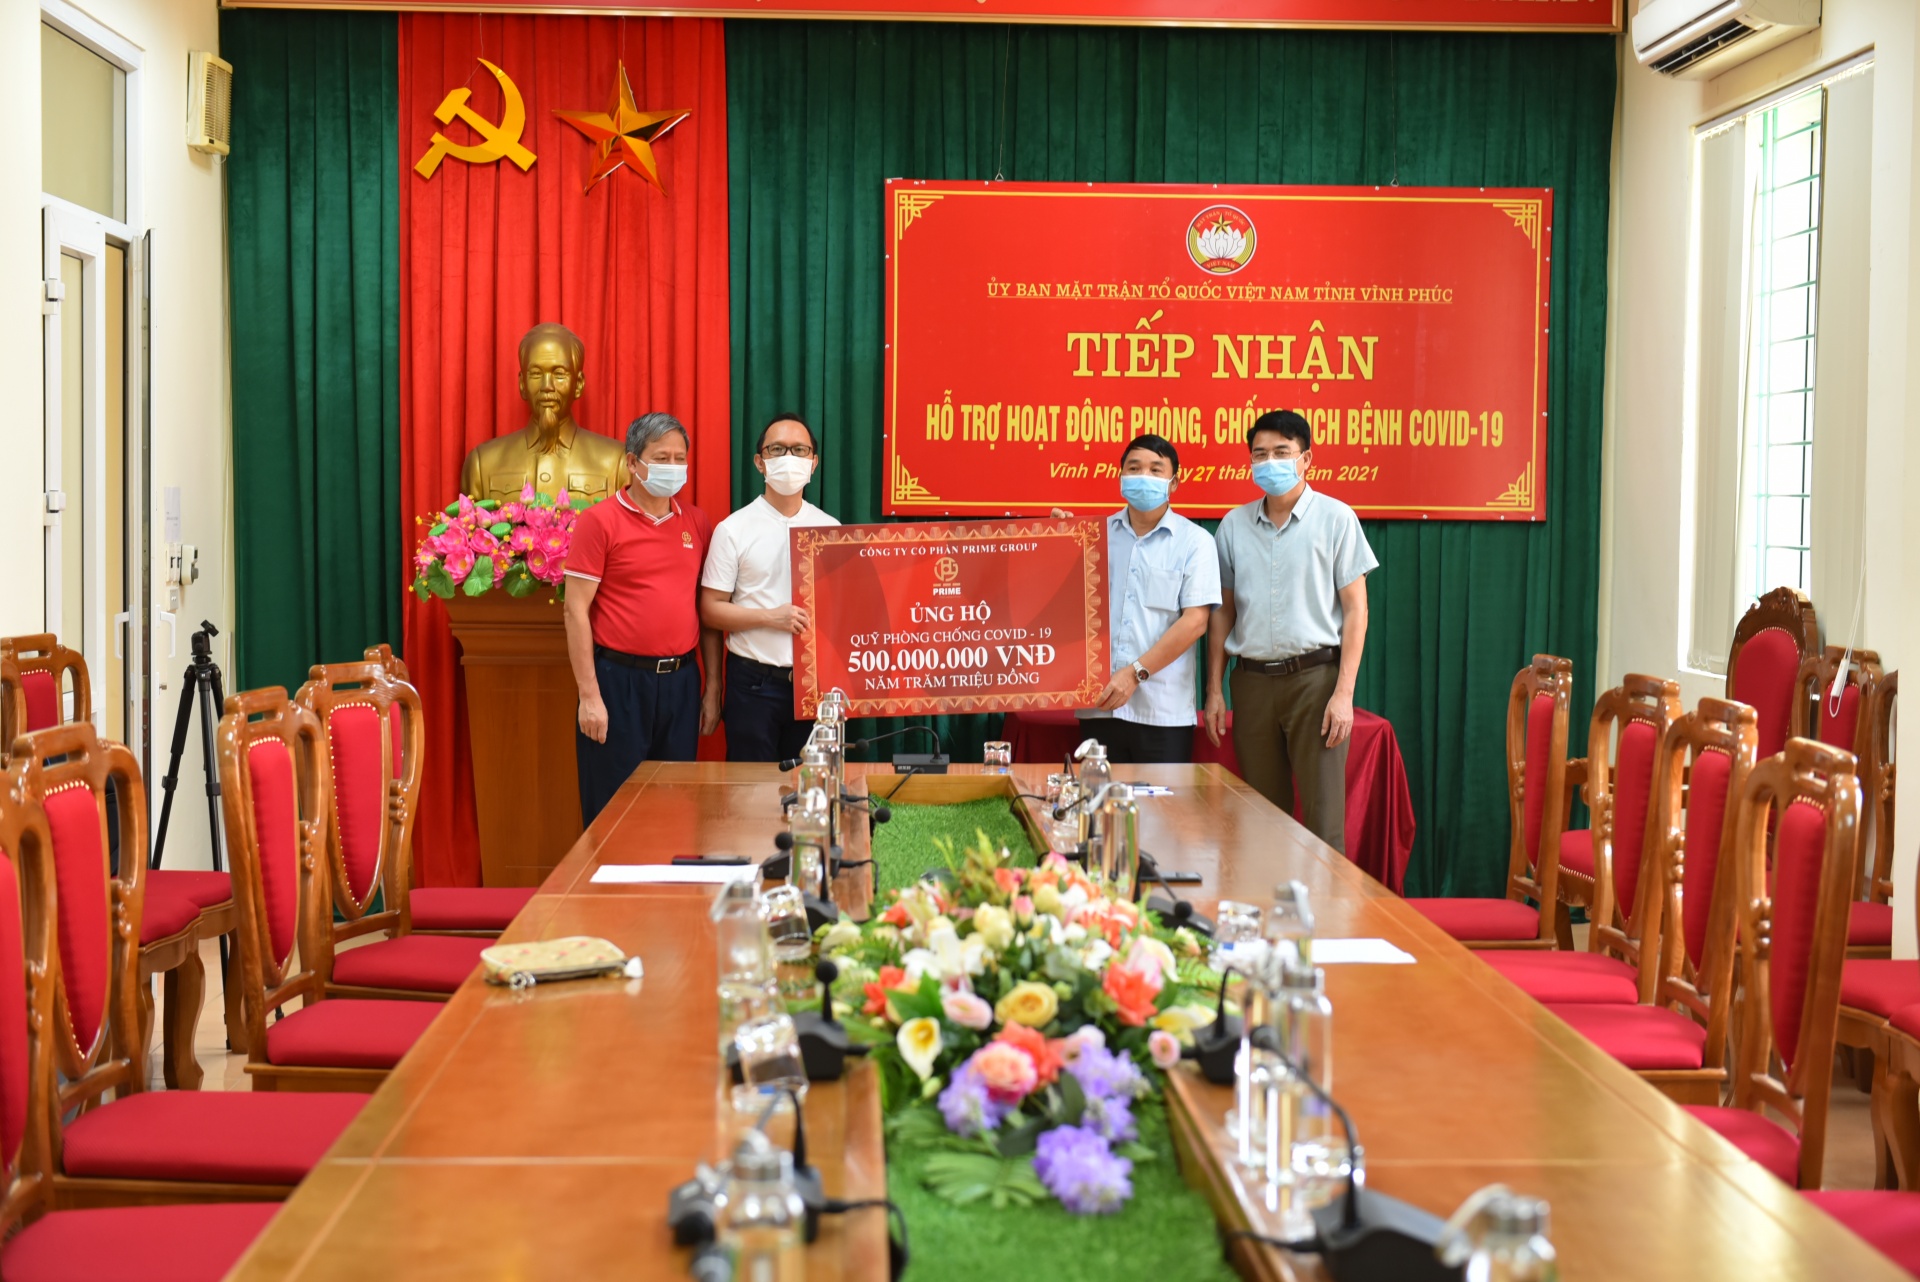 PRIME Group promotes campaign to support community affected by COVID-19 in Vietnam